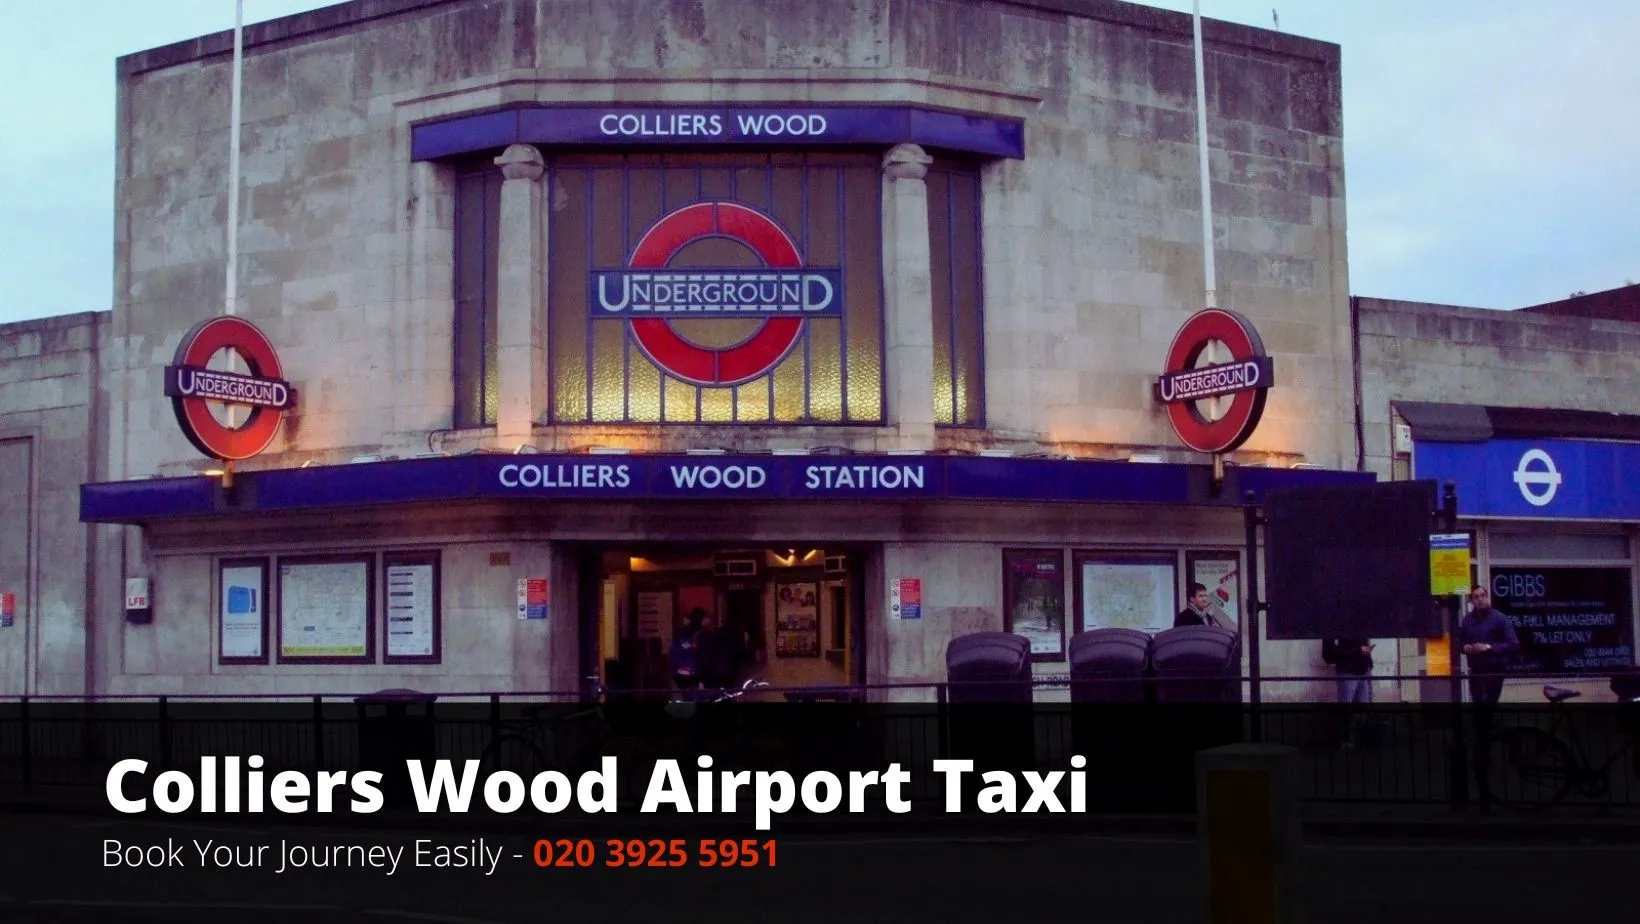 Colliers Wood taxi